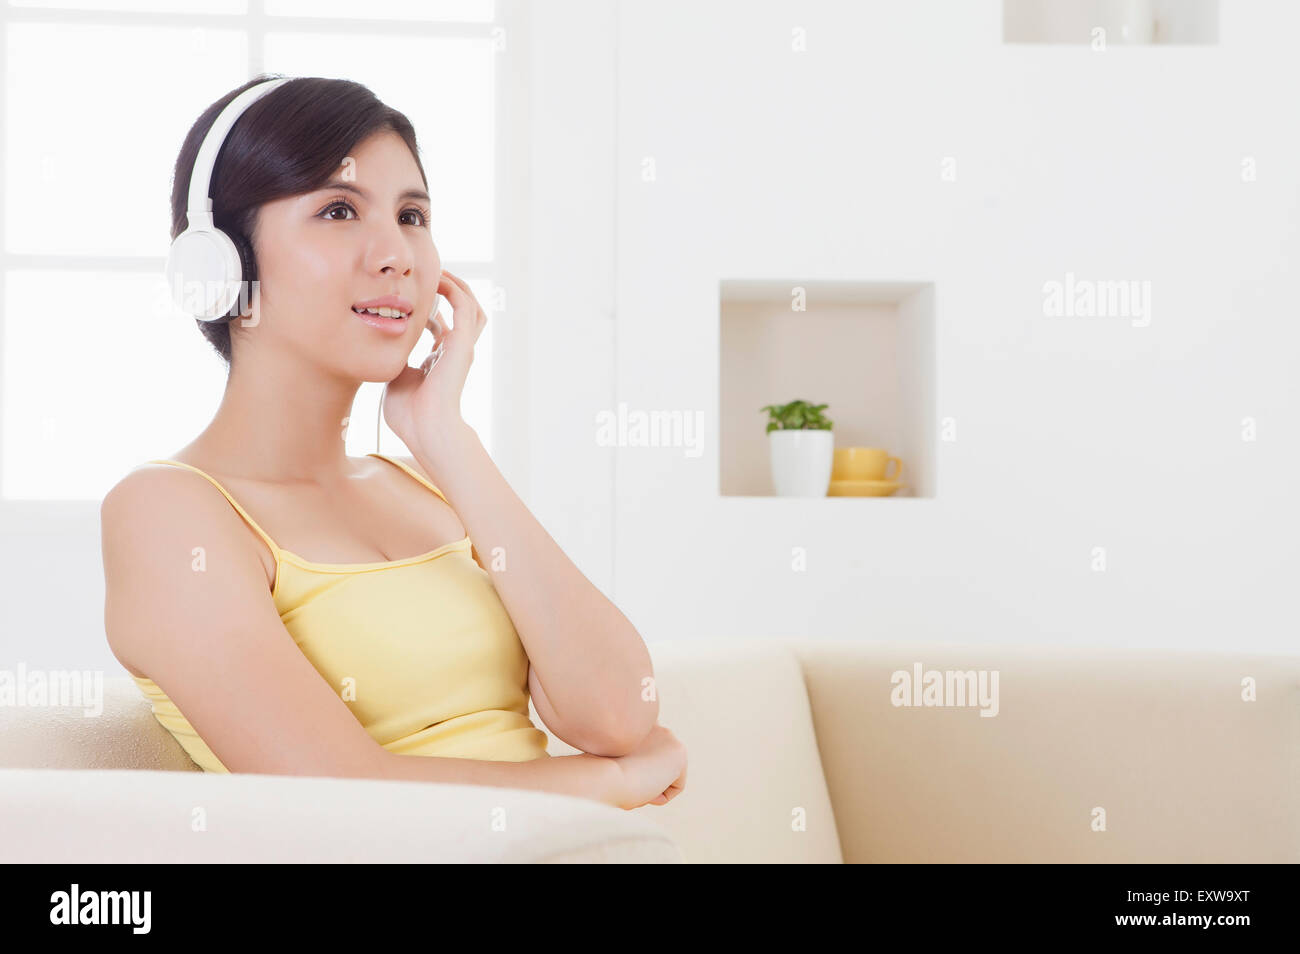 Young woman looking away with head phone and smiling, Stock Photo